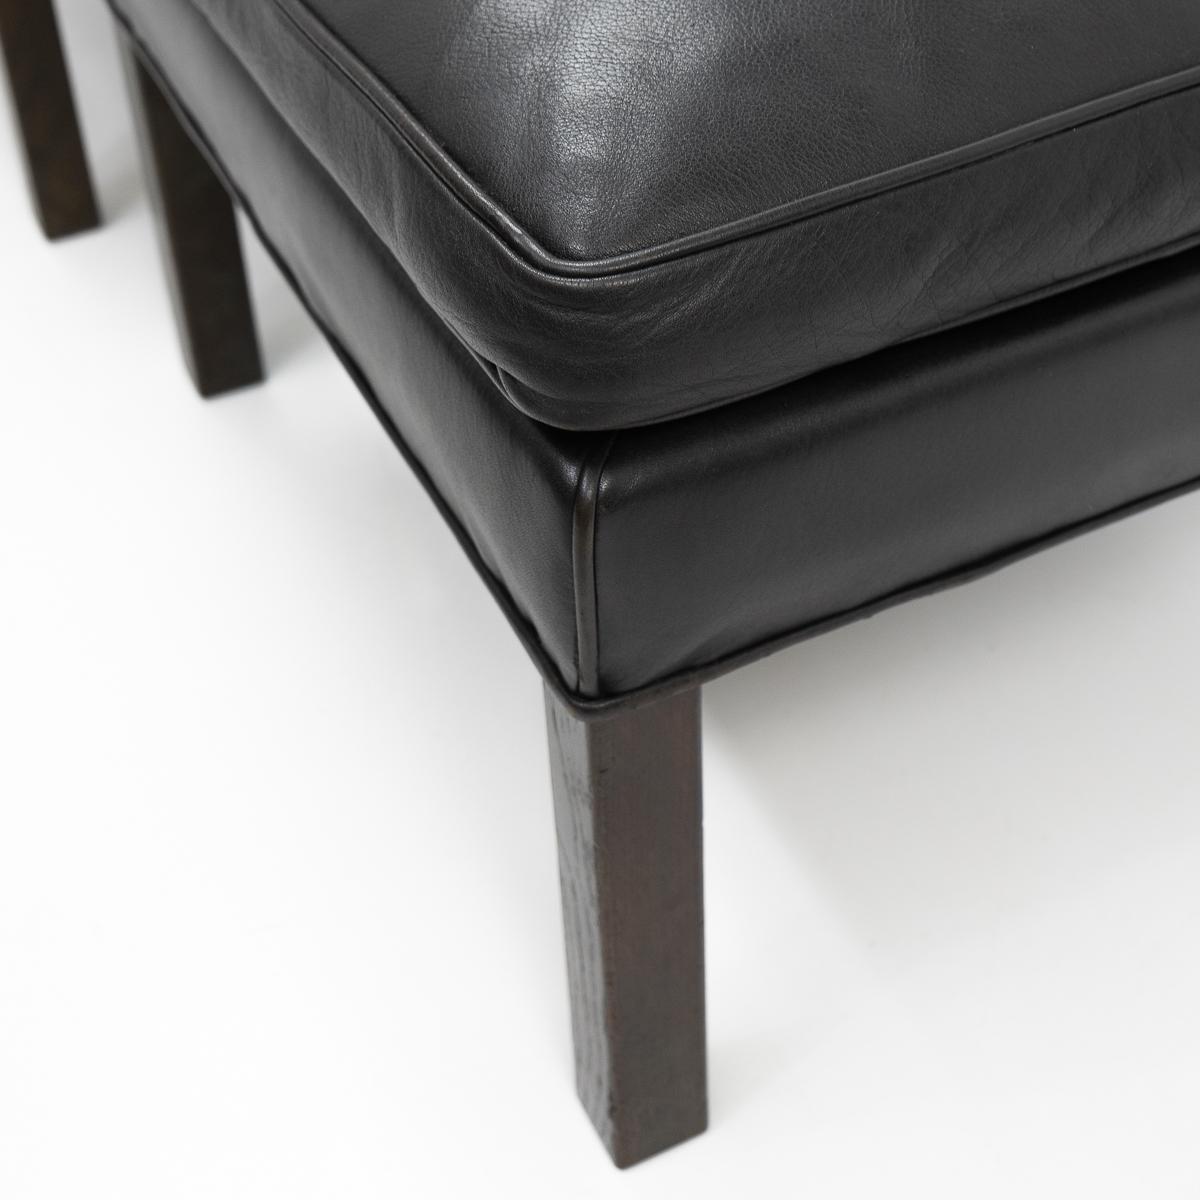 Design Classic Black Leather Wingchair and Footstool by Borge Mogensen, 1960s For Sale 8